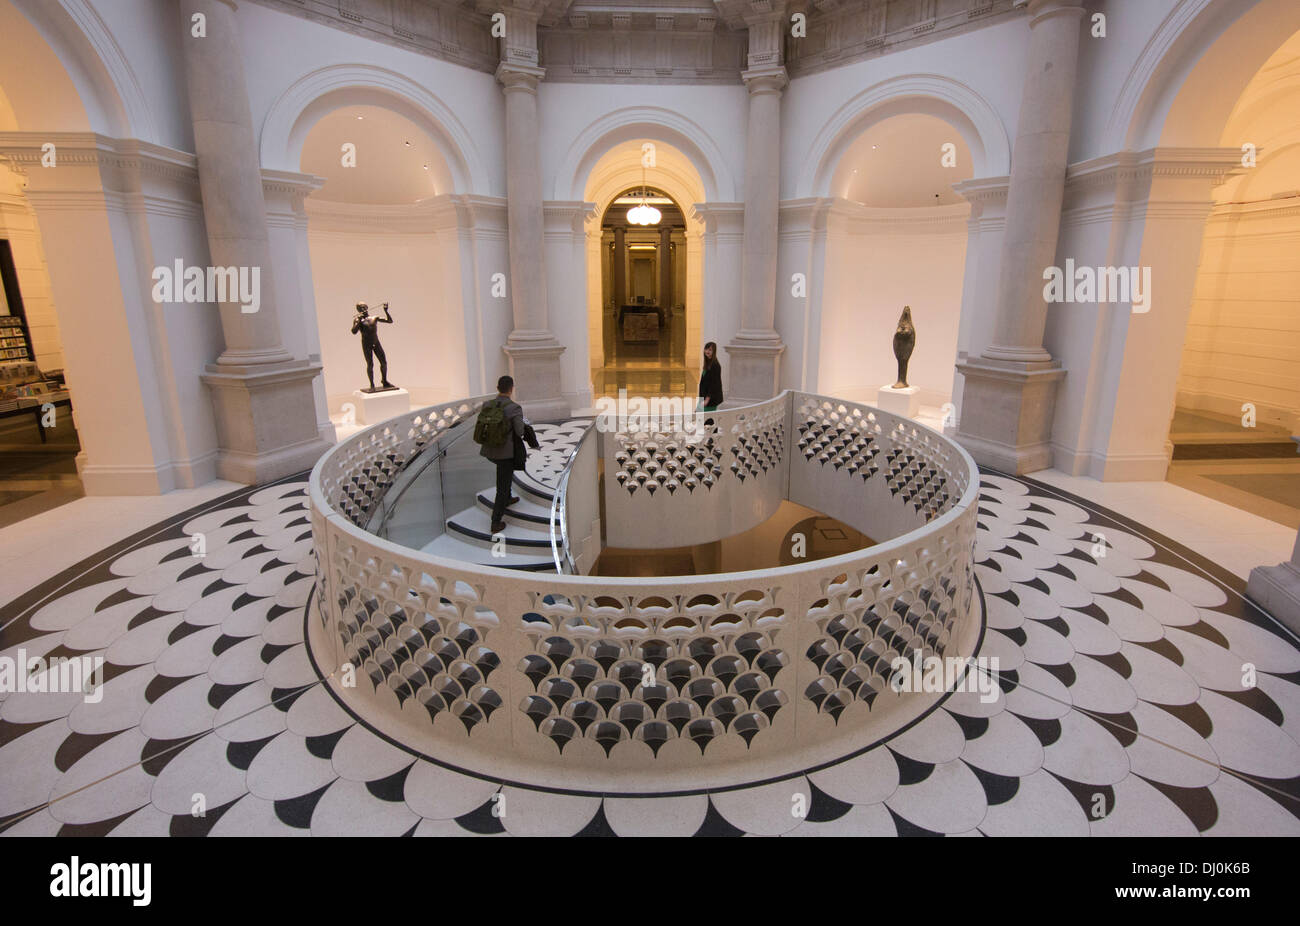 London, UK. 18 November 2013. The new Tate Britain is unveiled to the public on 19 November 2013. The transformation of the oldest part of the Grade II Millbank building was carried out by leading architects Caruso St John. The £45m project includes: reopening of the main entrance on Millbank and the striking new staircase inside the entrance opens up access to new public spaces below. Photo: bas/Alamy Live News Note: Editorial Use Only. Stock Photo